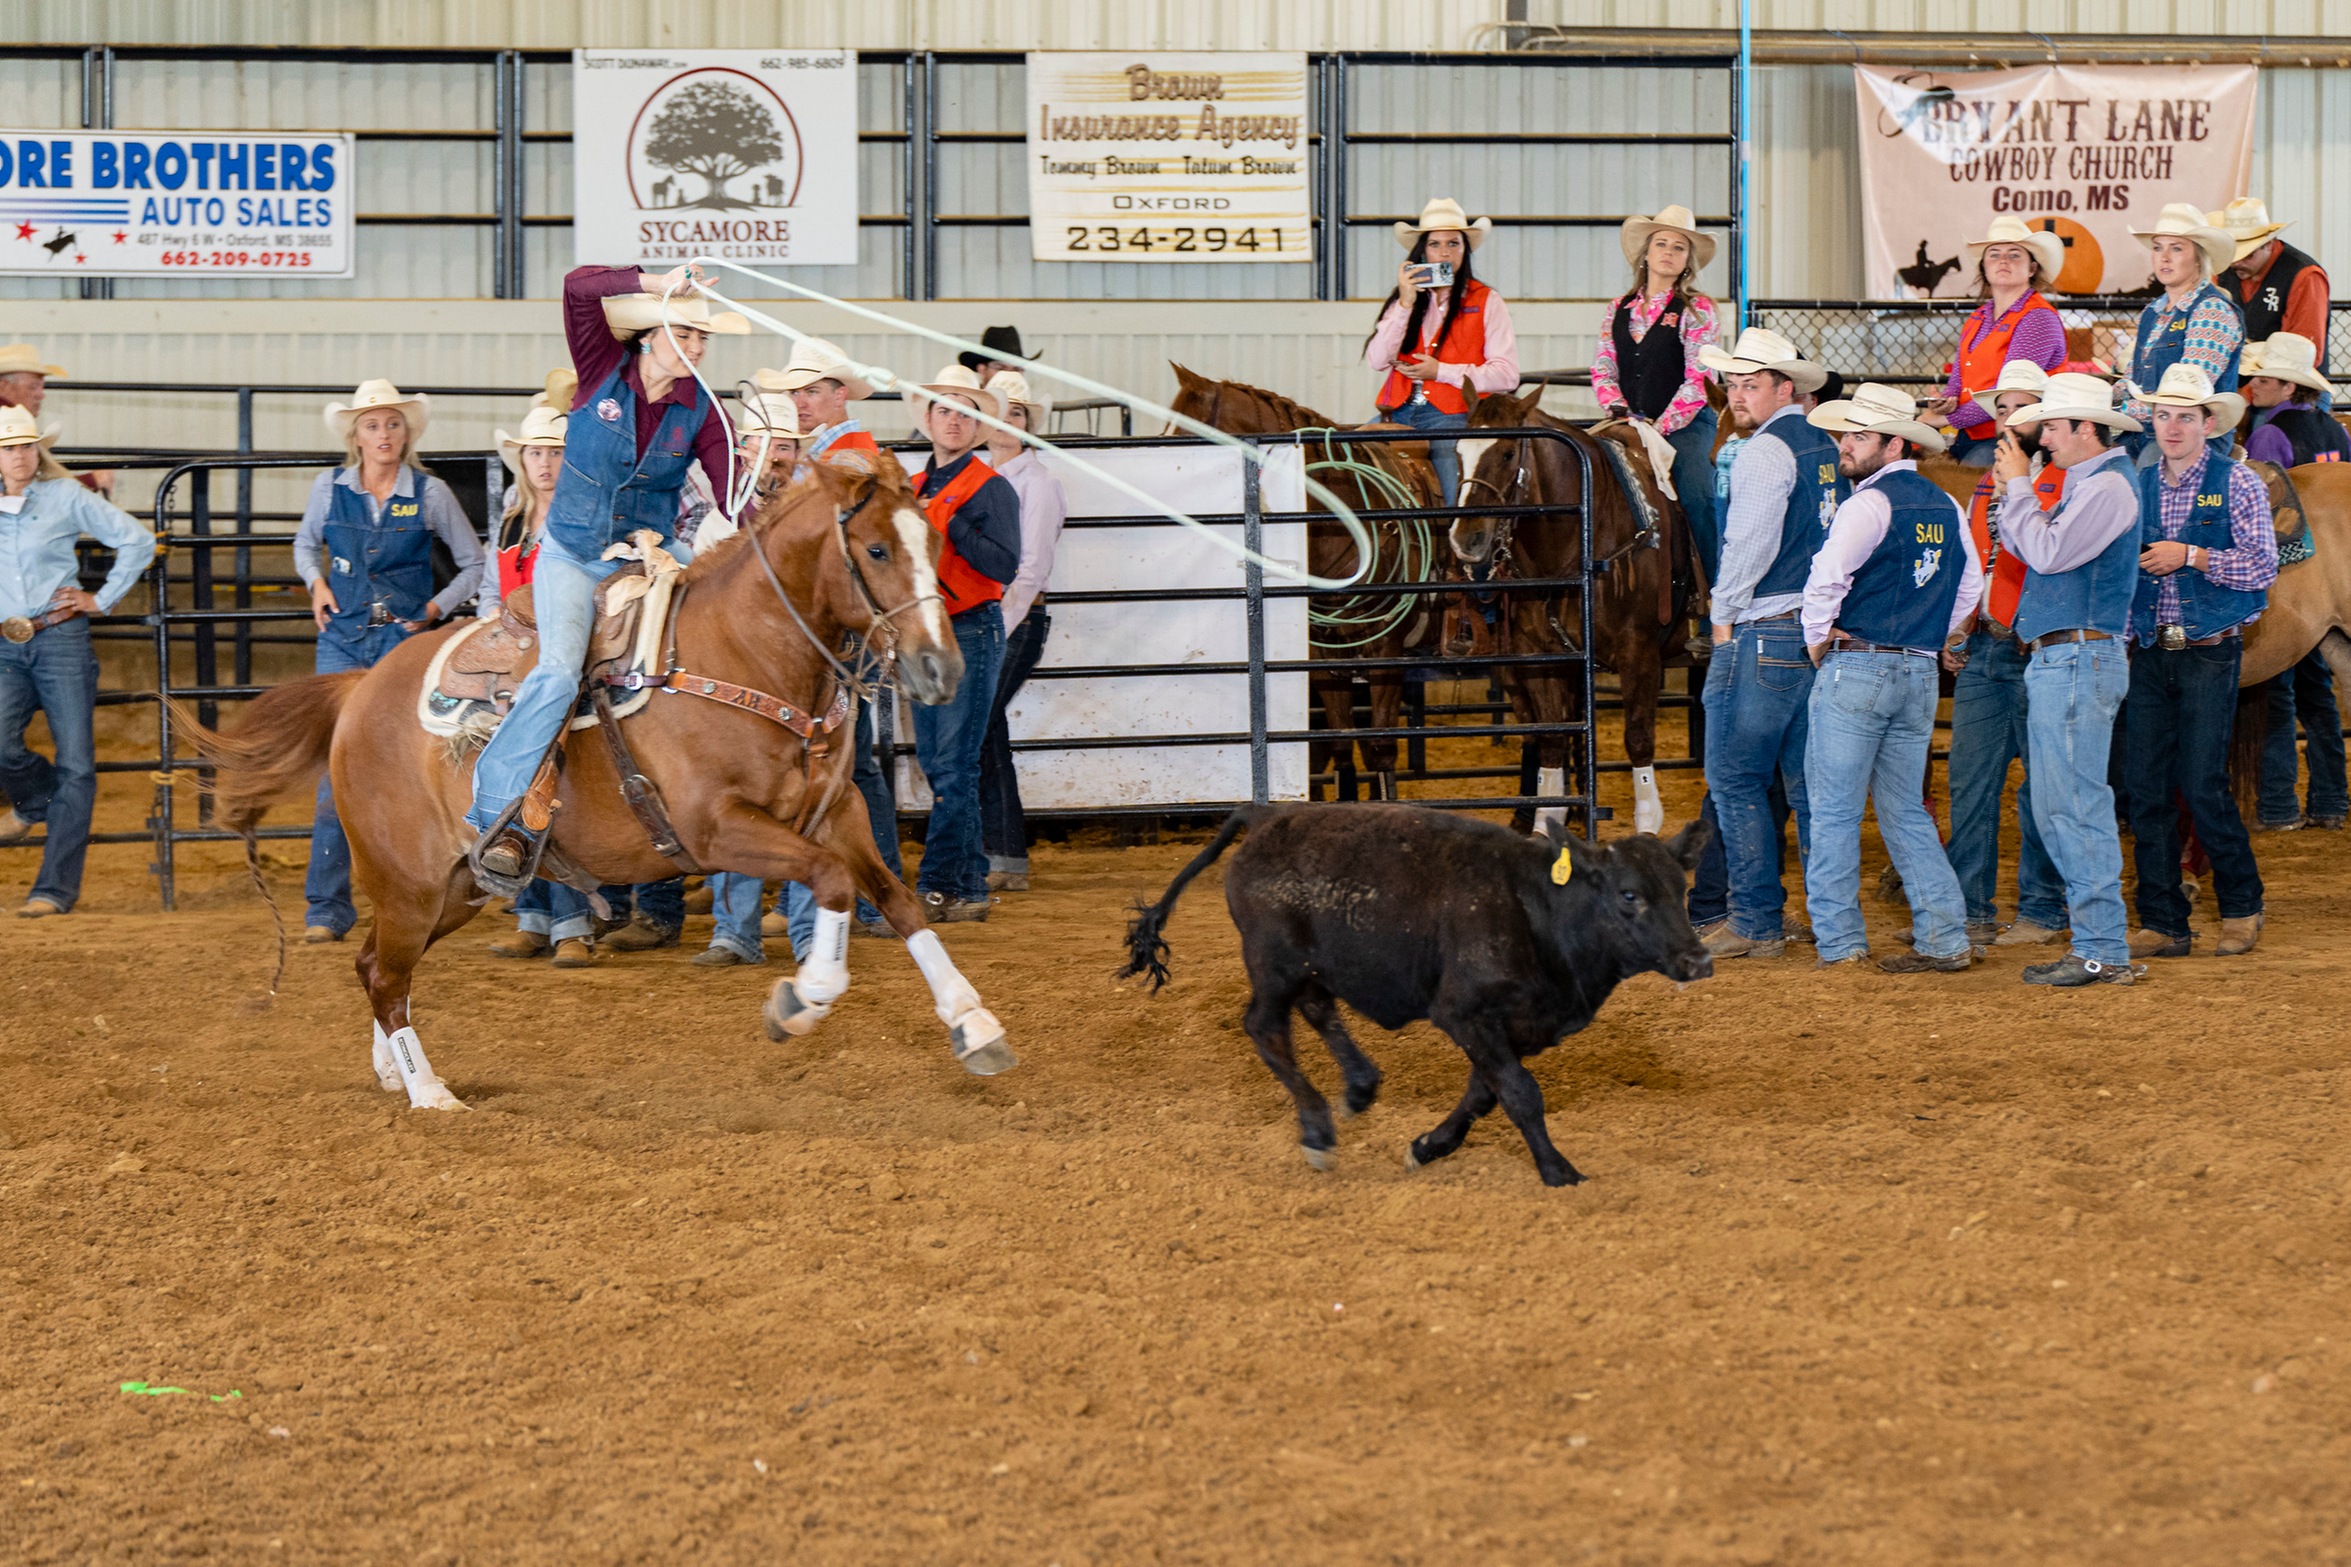 Pearl River rodeo closes out season with great performance